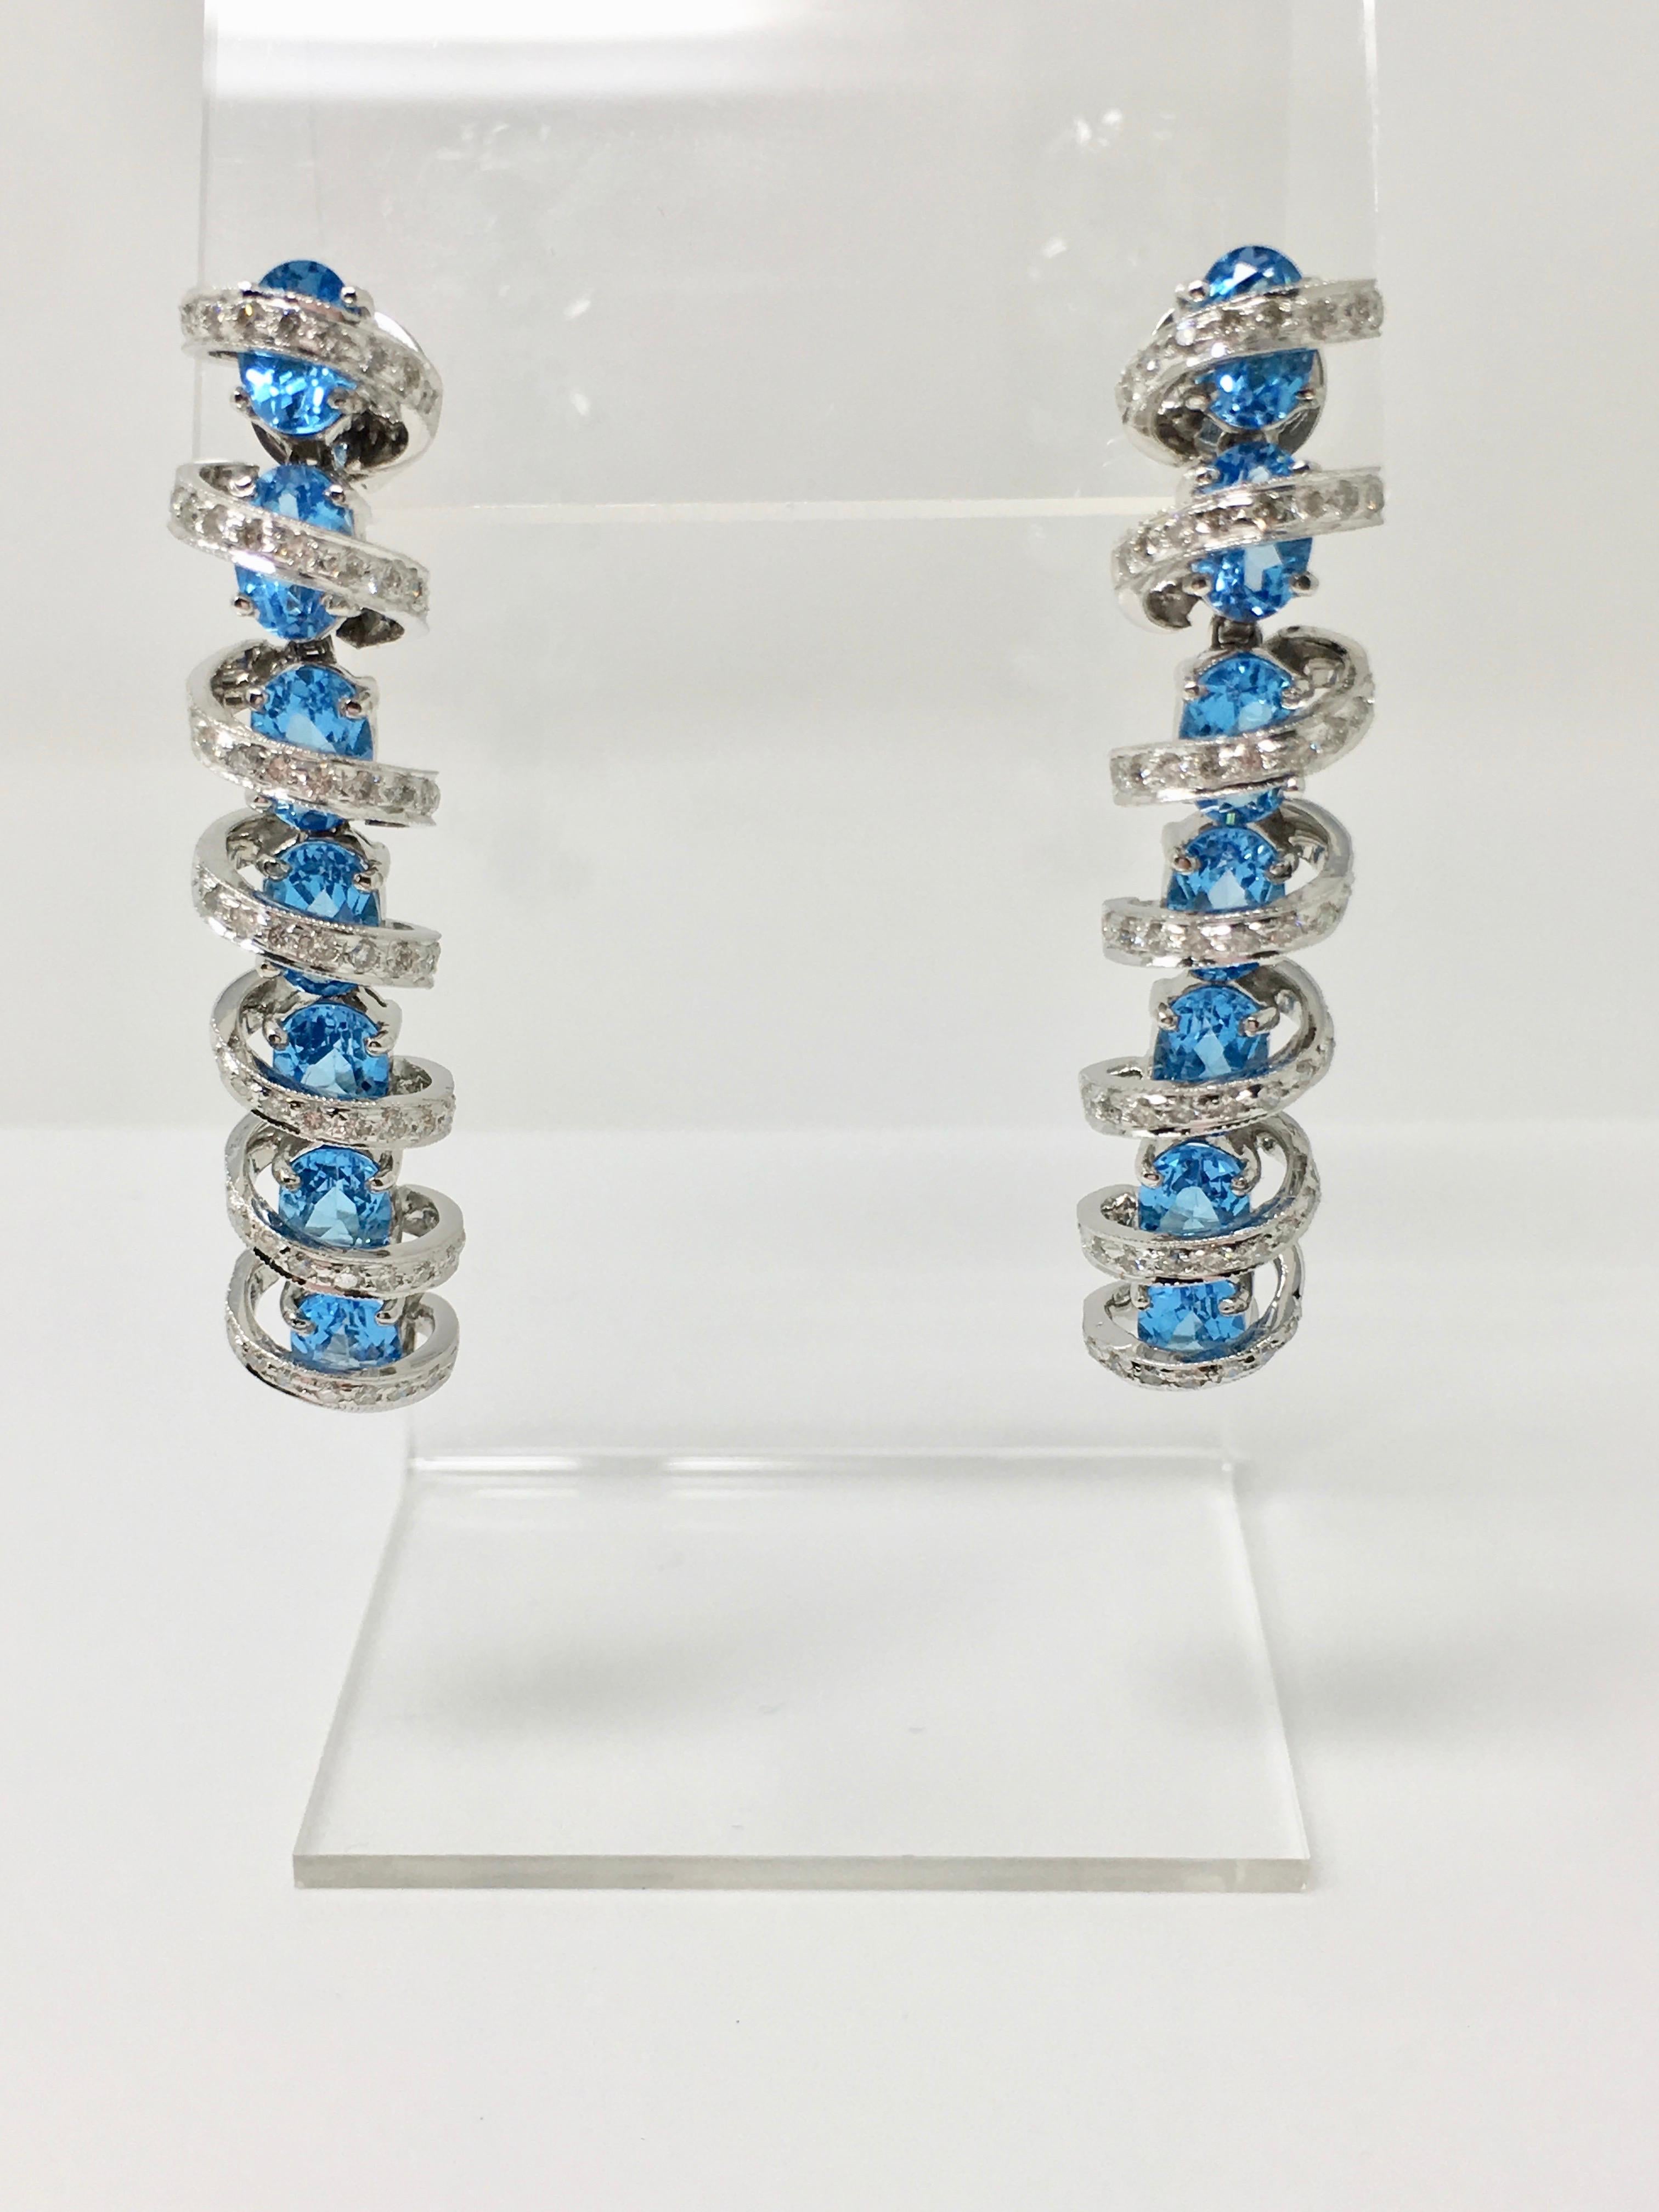 This unique white round brilliant diamond and blue topaz pendant set is beautifully custom hand made in 18k white gold. The white round brilliant diamond weighs 3 carats approx and oval blue topaz weighs 26 carats approx. The length of the earrings